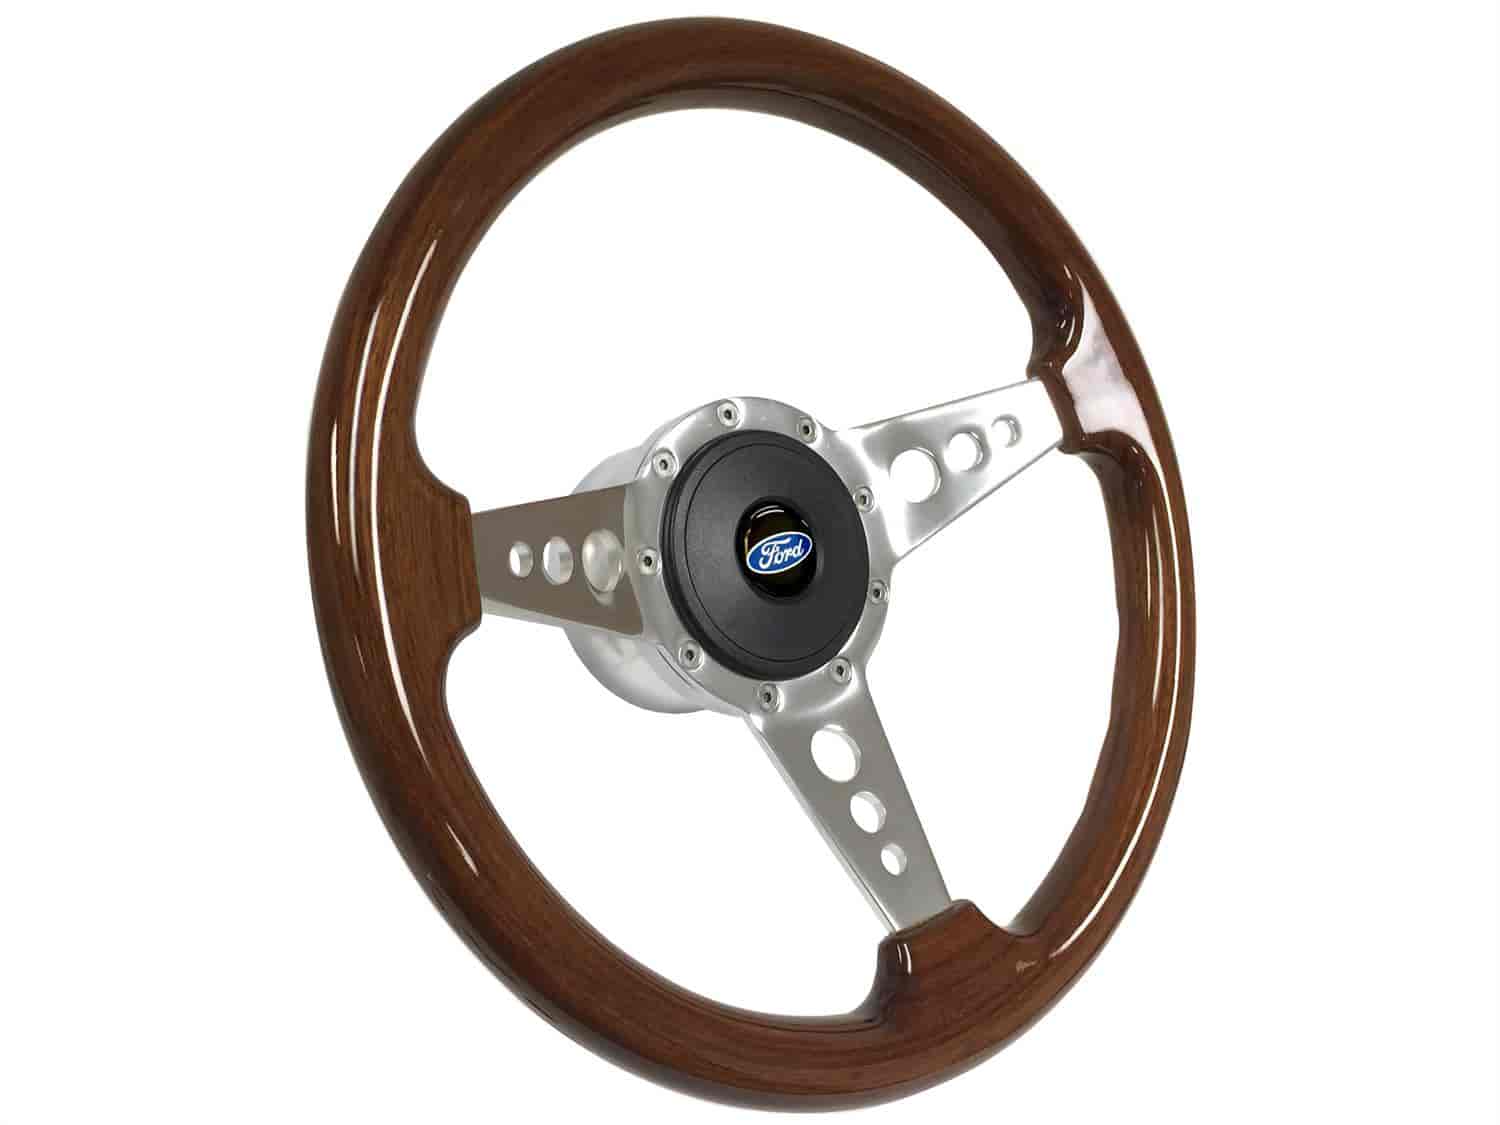 S9 Sport Steering Wheel Kit 1968-1991 Ford/Mercury, 14 in. Diameter, Walnut Wood Grip, w/ 9-Bolt Adapter and Horn Button